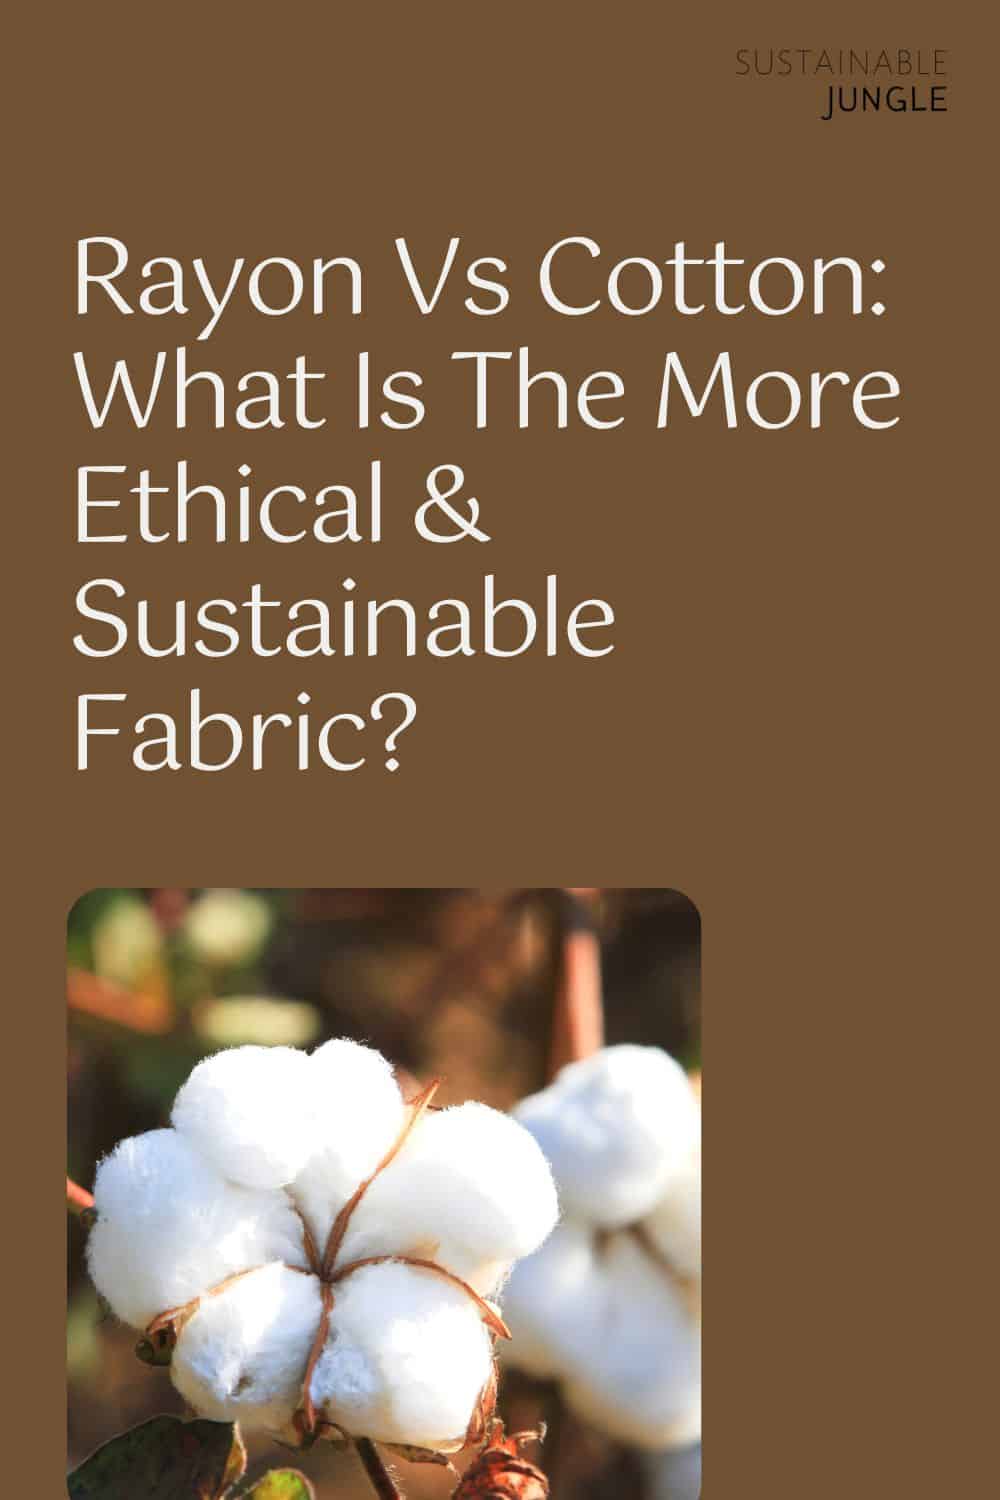 Rayon vs Cotton: What is the Difference Between the Two Popular Materials? Image by PeteMuller via Getty Images Signature on Canva Pro #rayonvscotton #cottonvsrayon #rayonfabricvscotton #bamboorayonvscotton #rayonvspolystervscotton #sustainablejungle